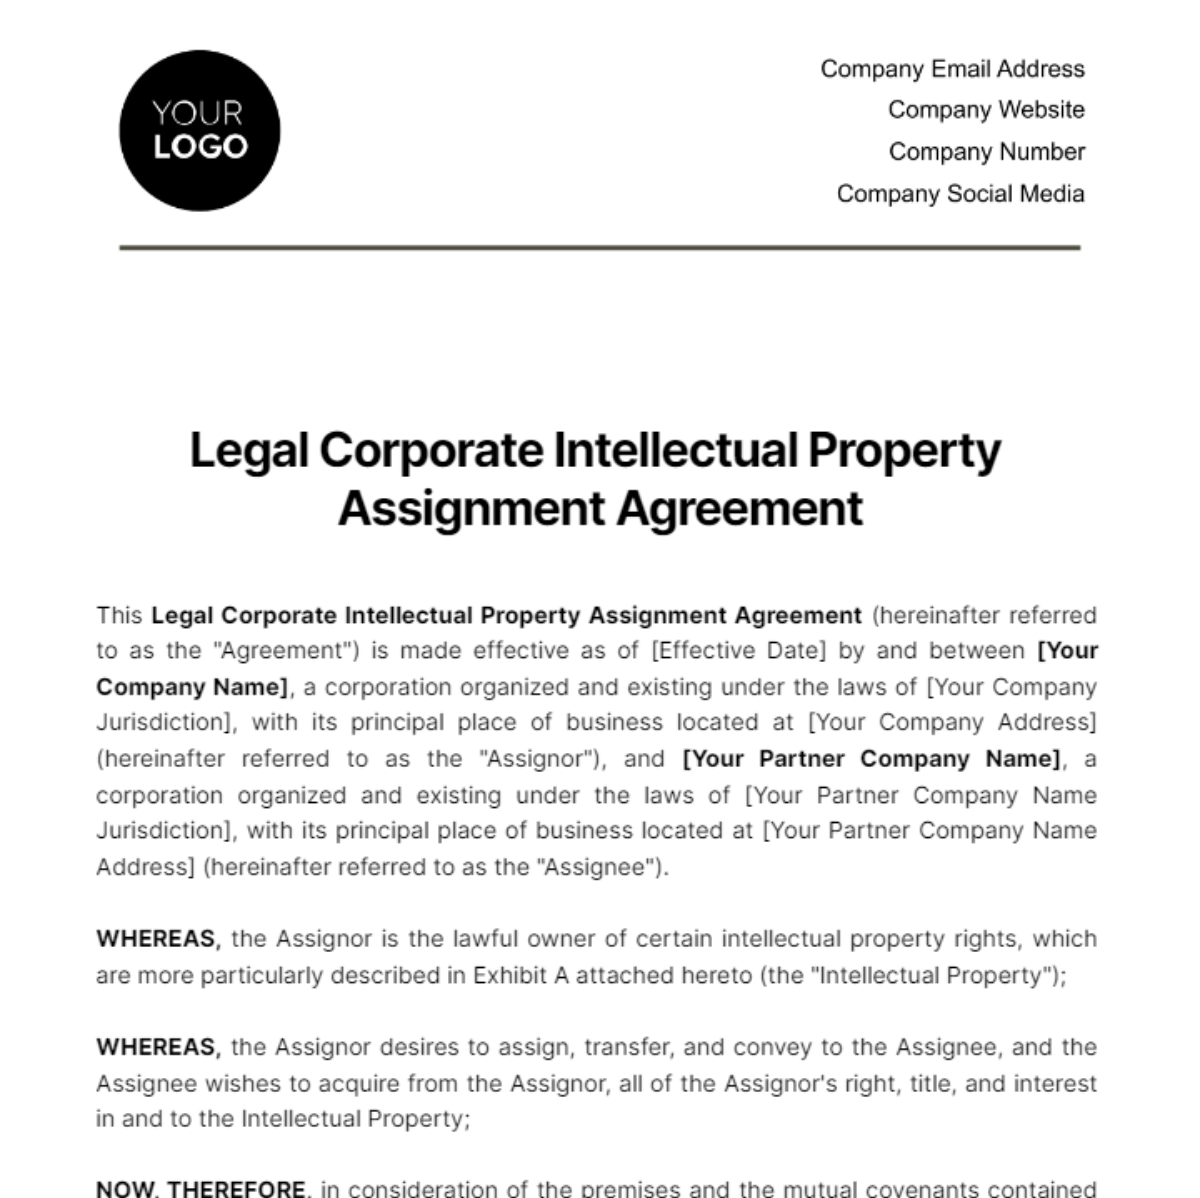 Free Legal Corporate Intellectual Property Assignment Agreement Template